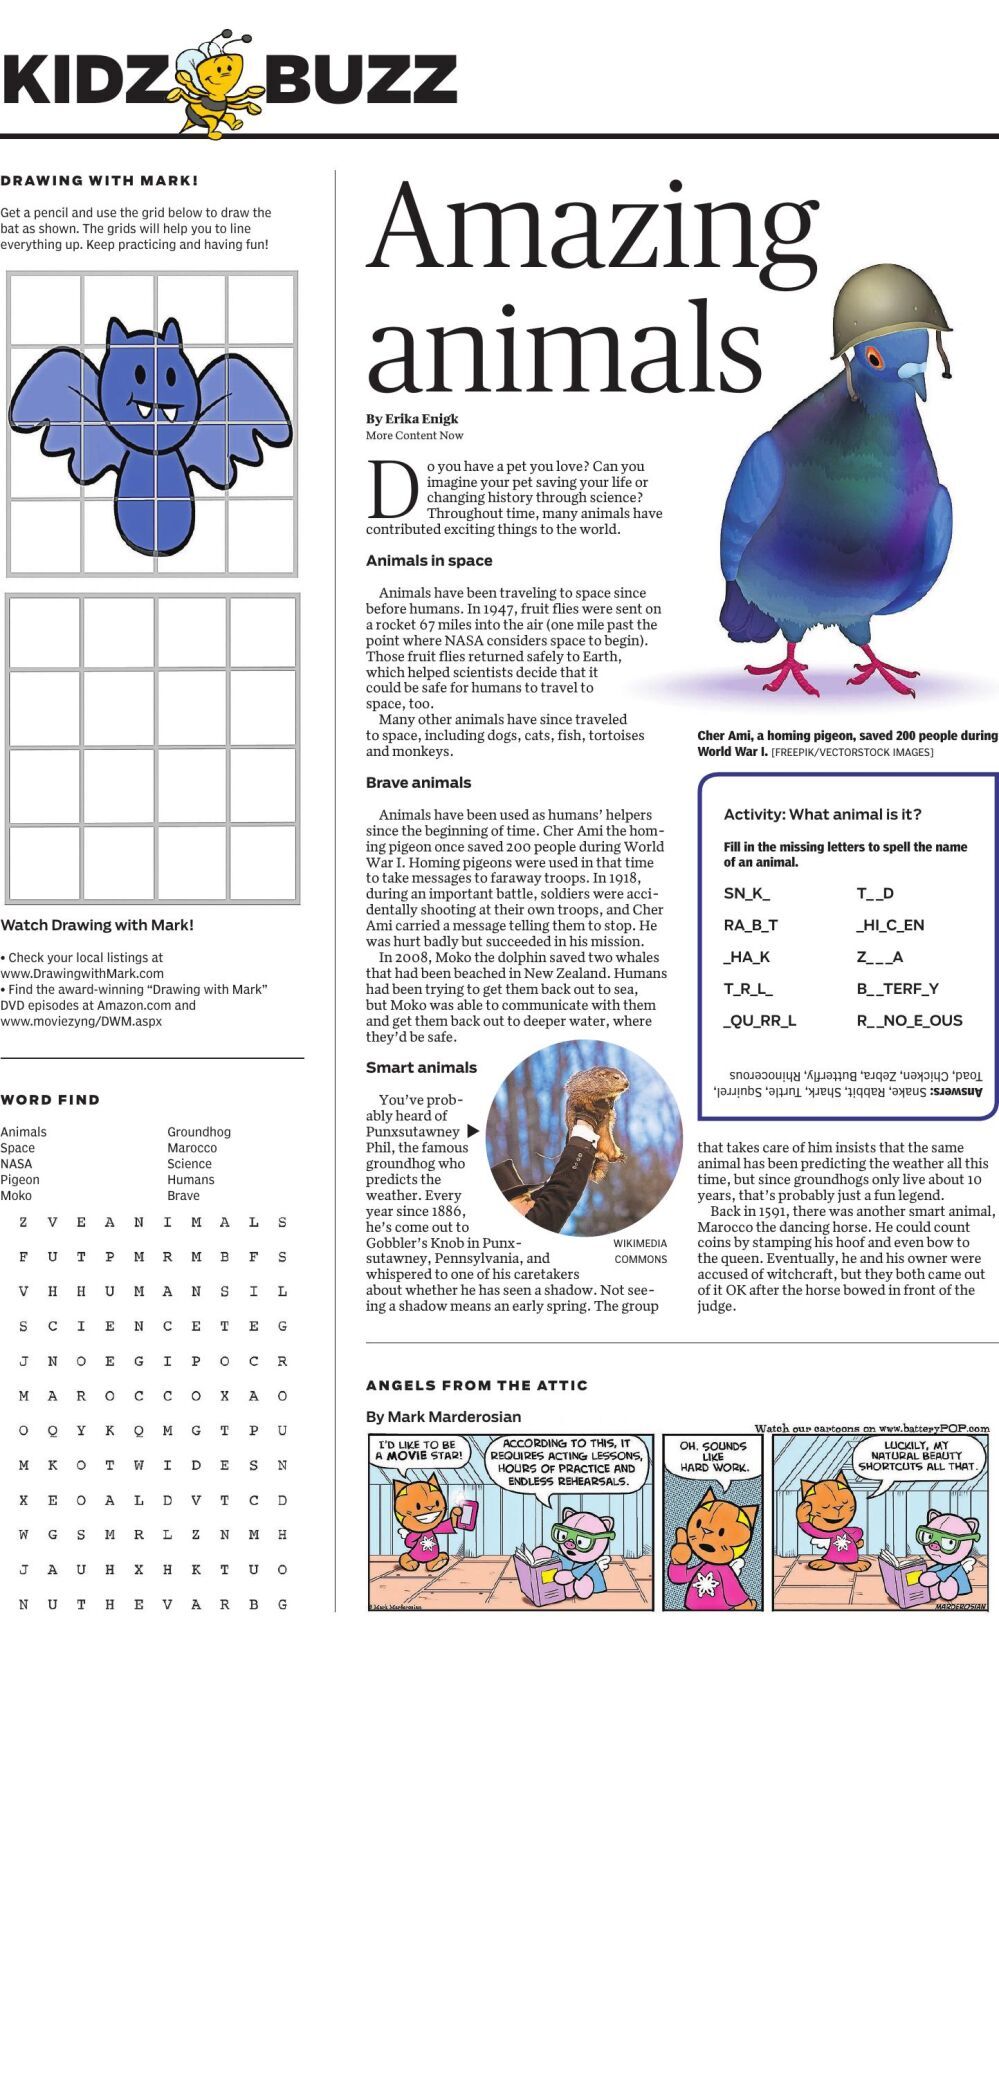 Download and print these kids' activity sheets for hours of fun